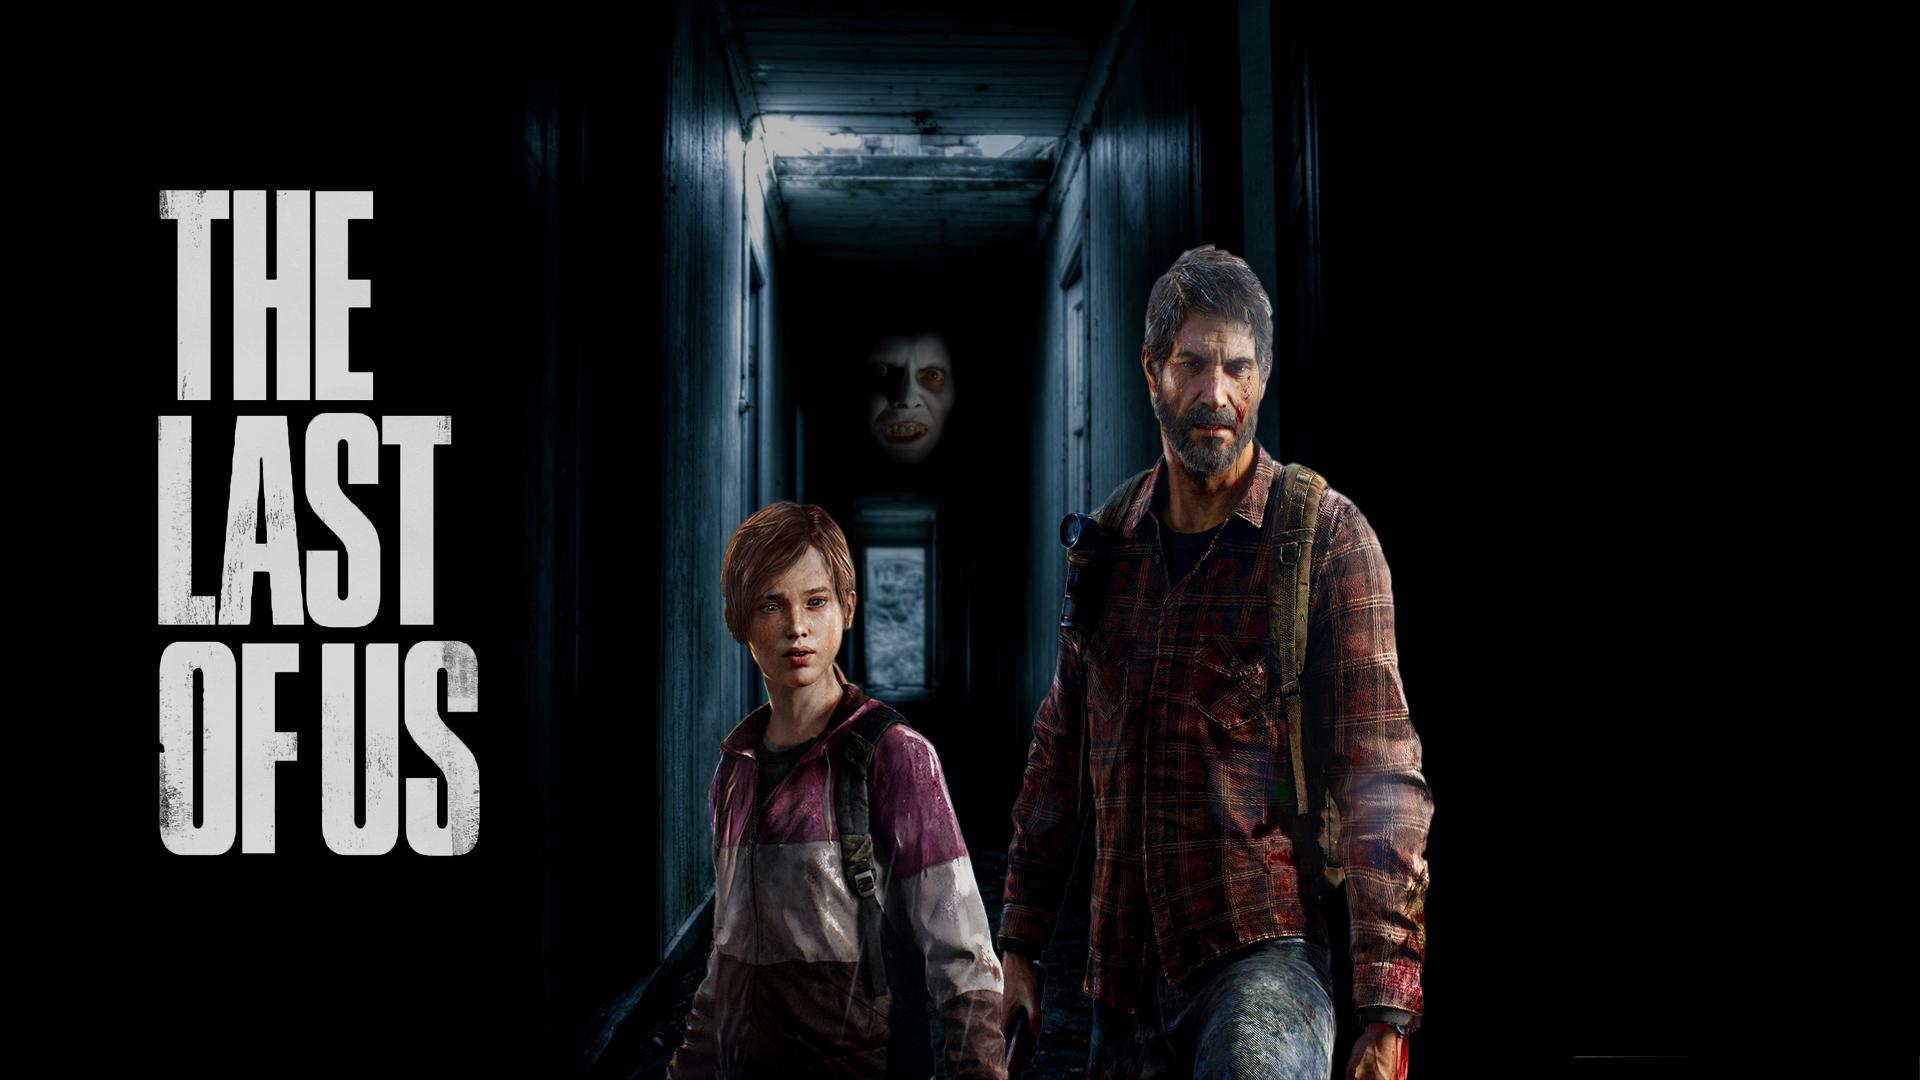 The last of us High Quality and Resolution Wallpapers on